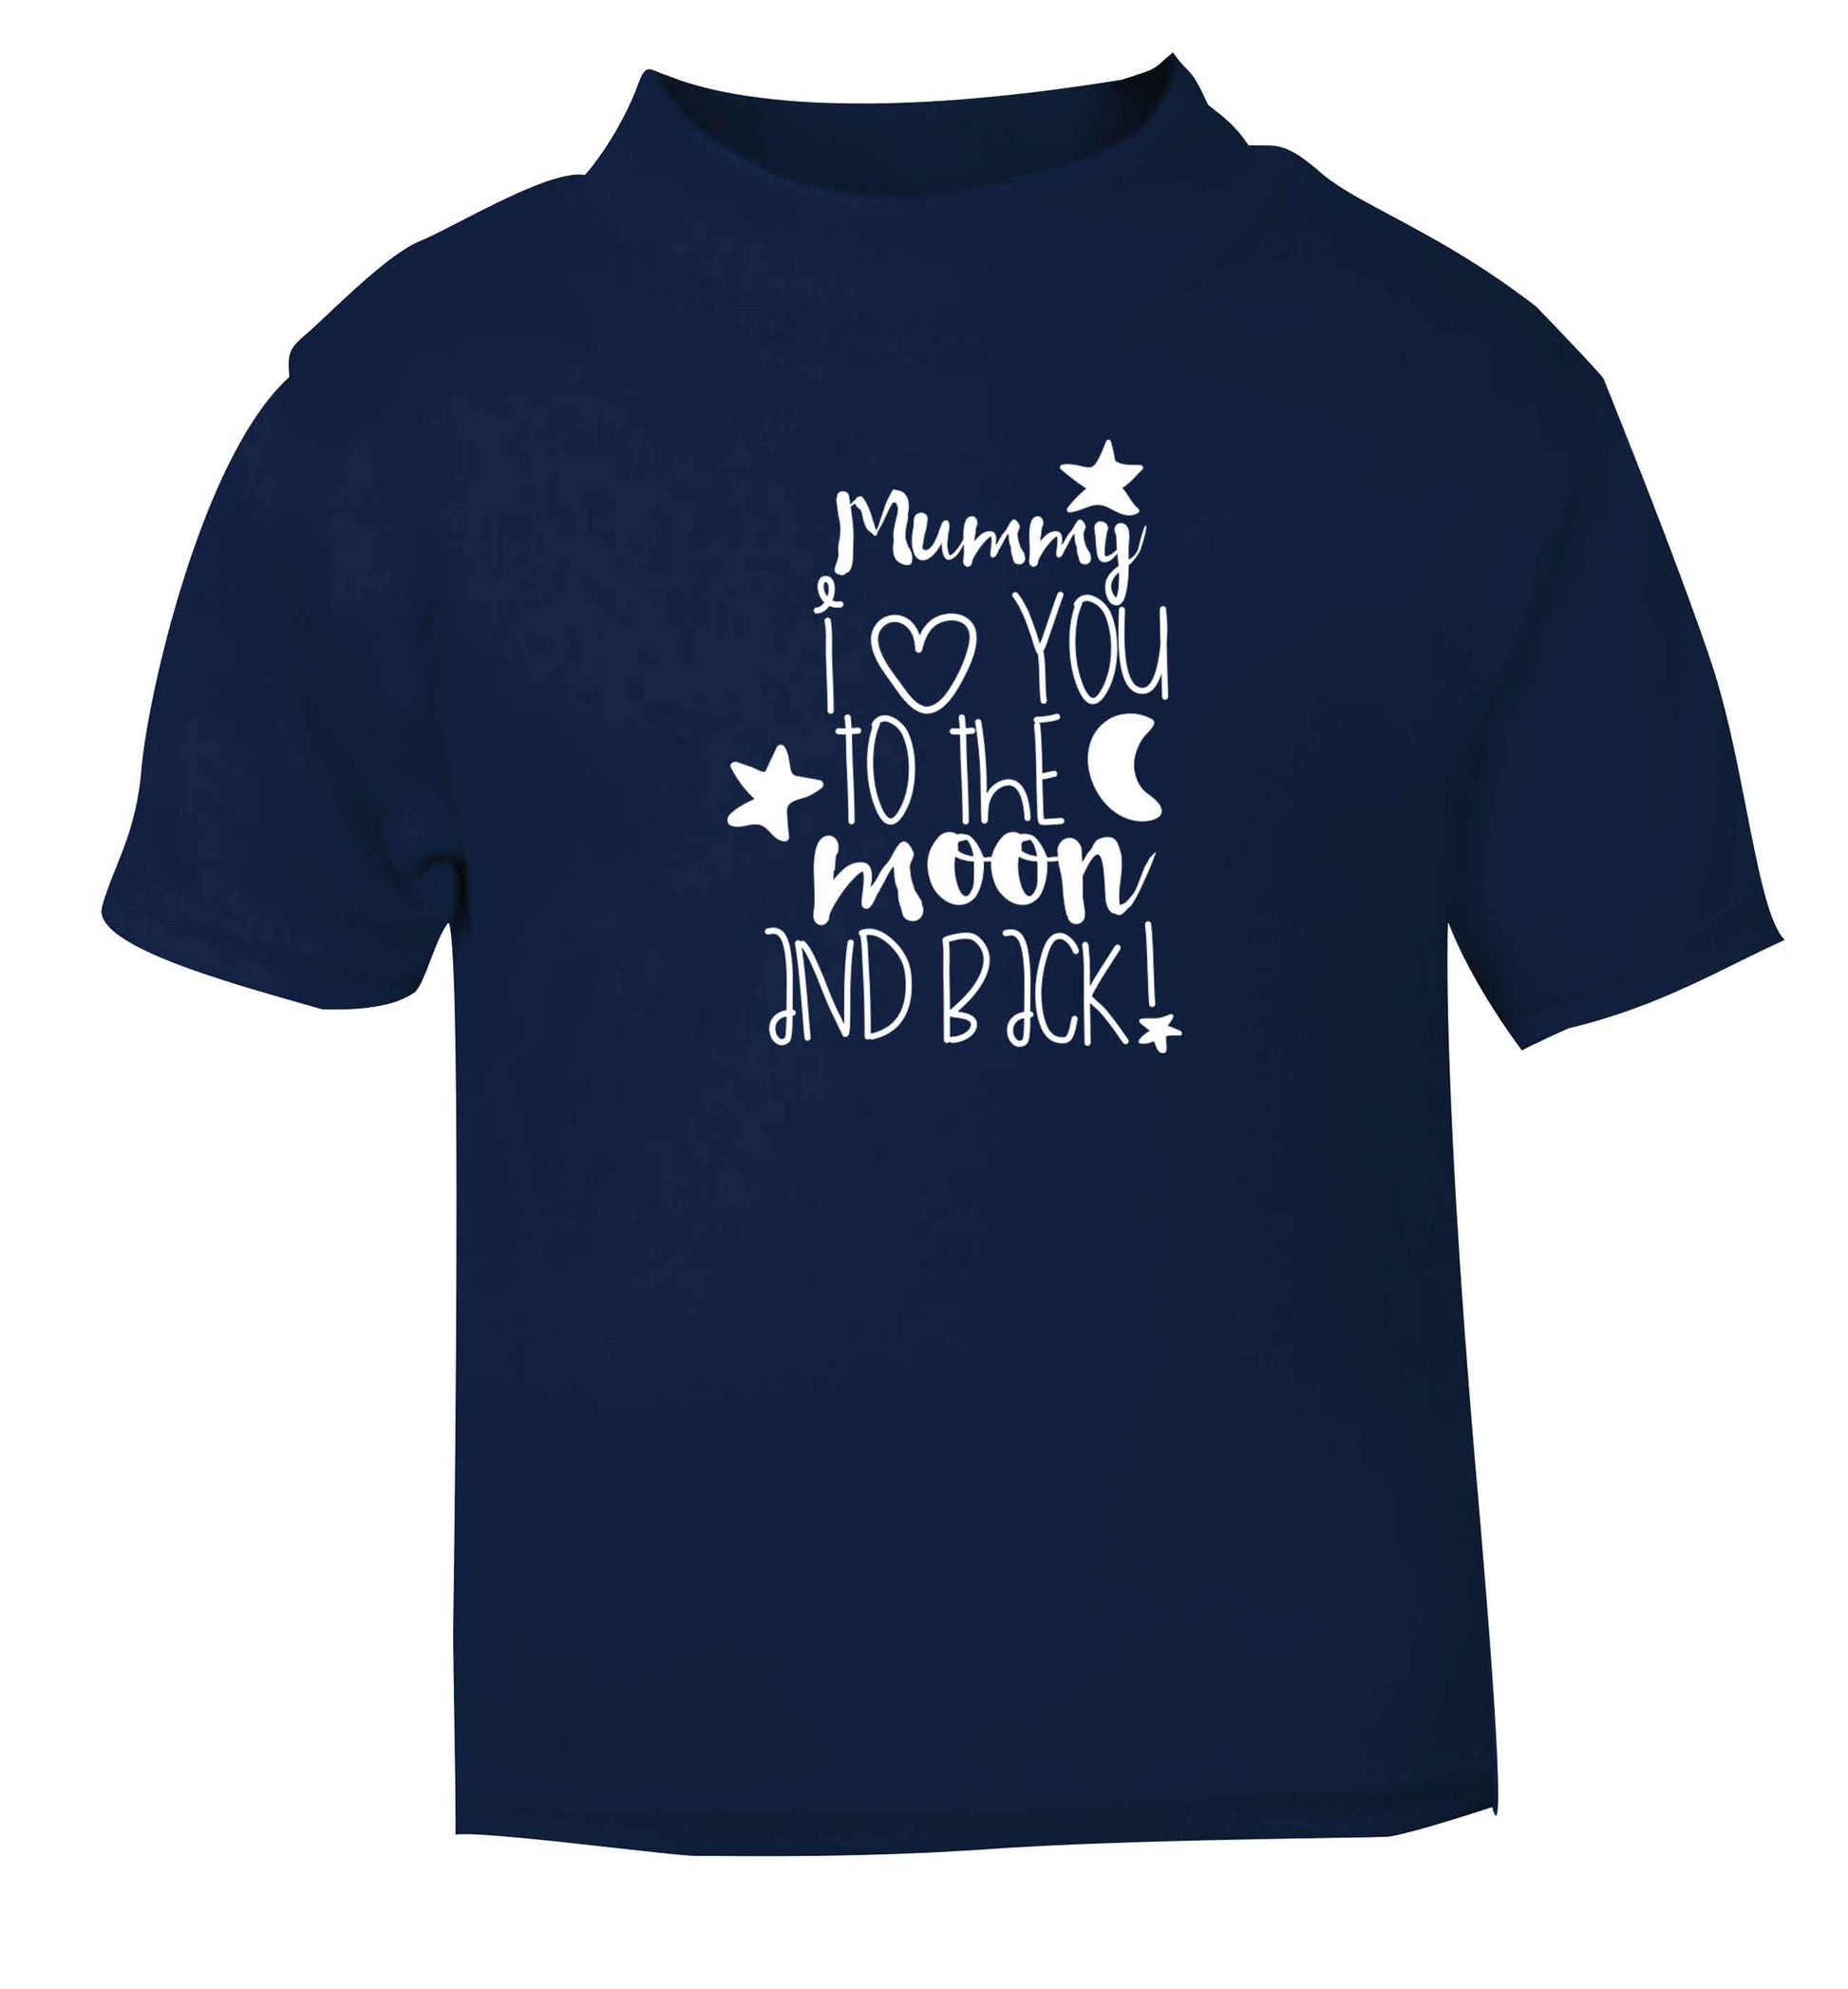 Mummy I love you to the moon and back navy baby toddler Tshirt 2 Years